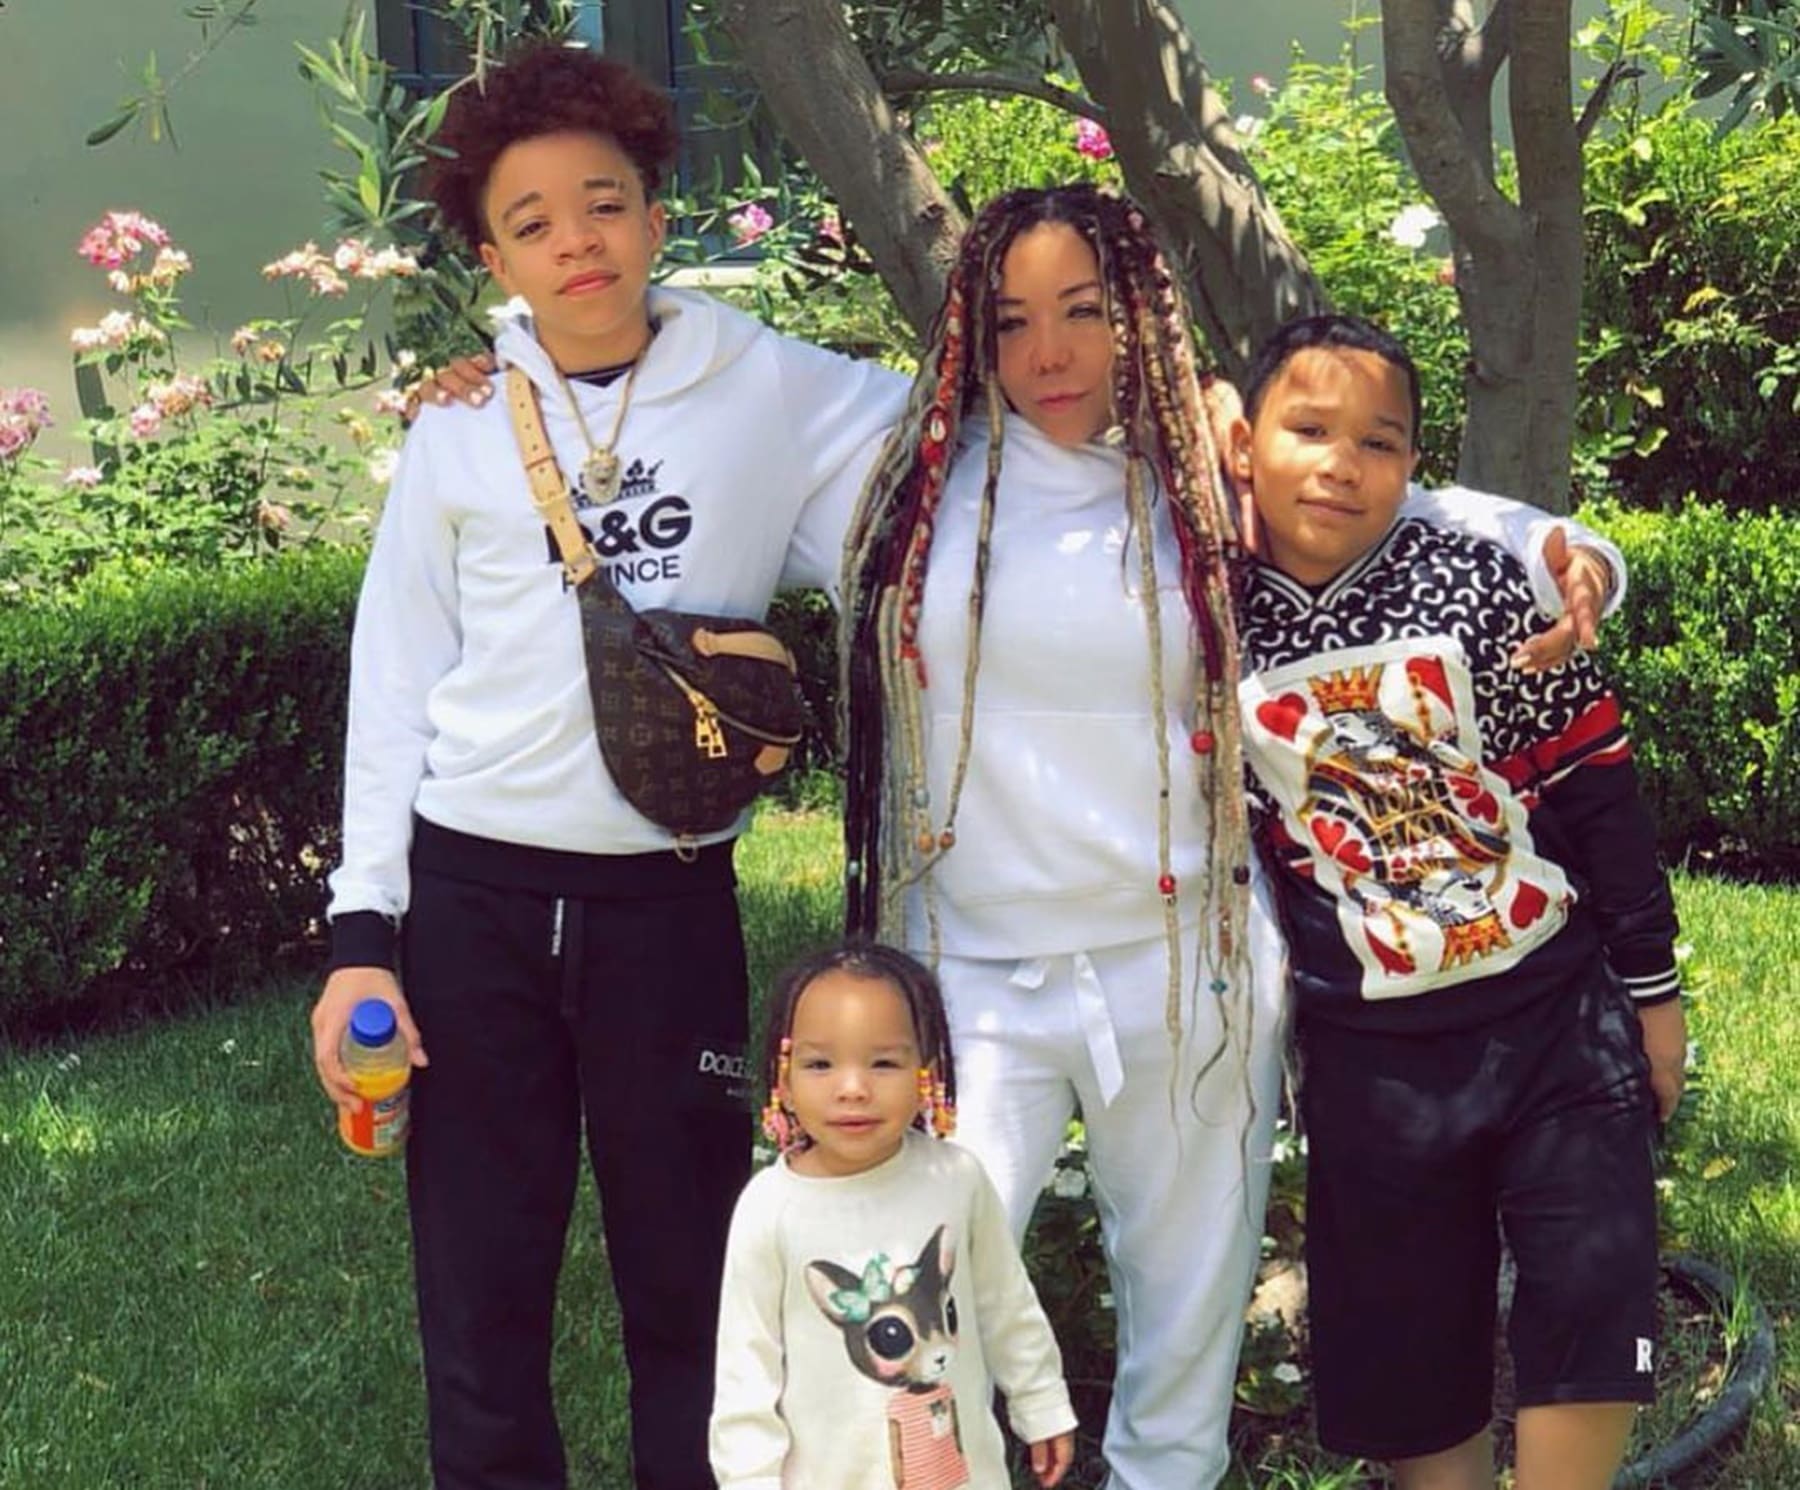 Tiny Harris Has The Time Of Her Life At Lake Tahoe With Her Family - Check Out The Photos